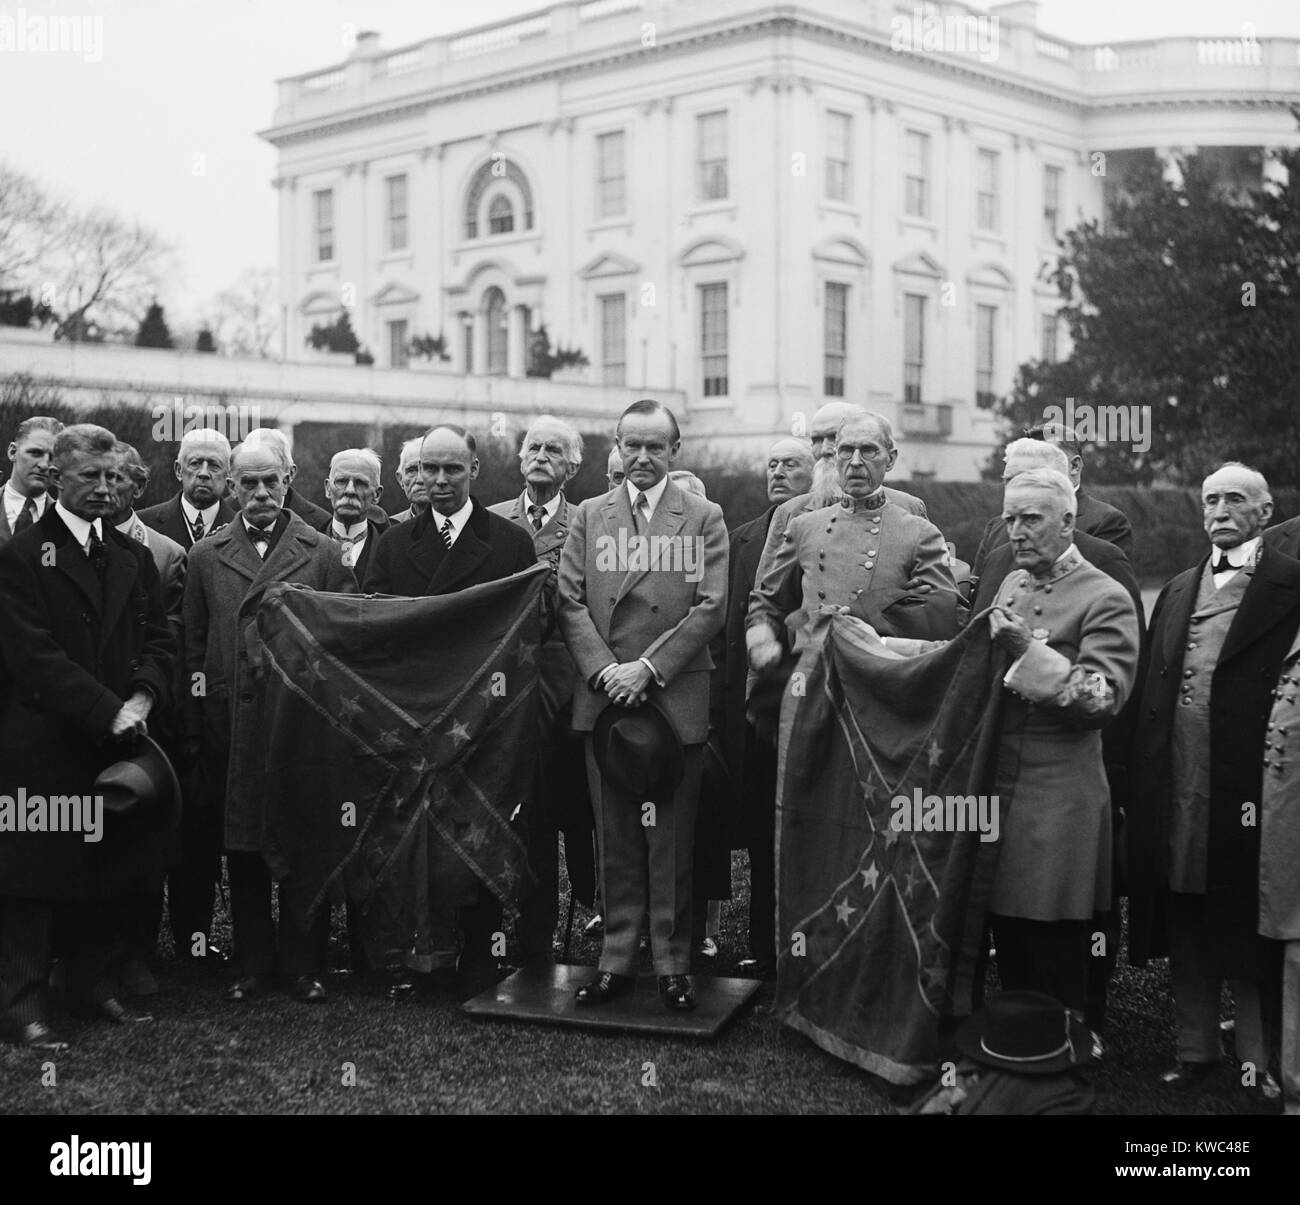 President Calvin Coolidge with Confederate group holding 'Star and Bars' flag. White House, Dec. 1927. (BSLOC 2015 15 128) Stock Photo